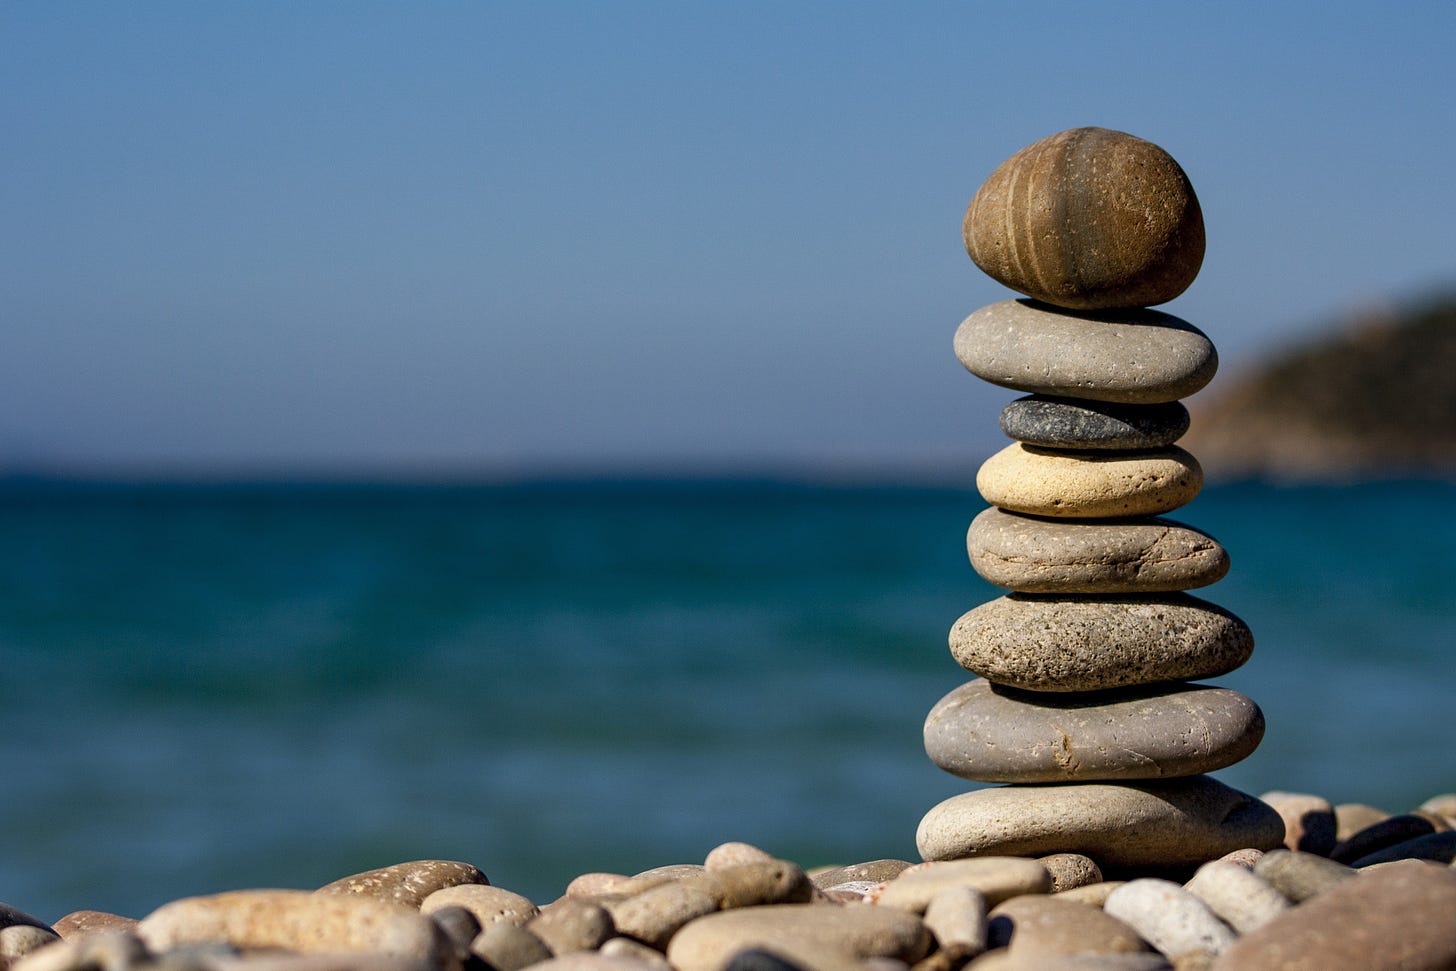 an image of 8 stones balanced on top of each other in a stack on the shore of a lake or ocean with green waters an d a blue sky blurred in the background